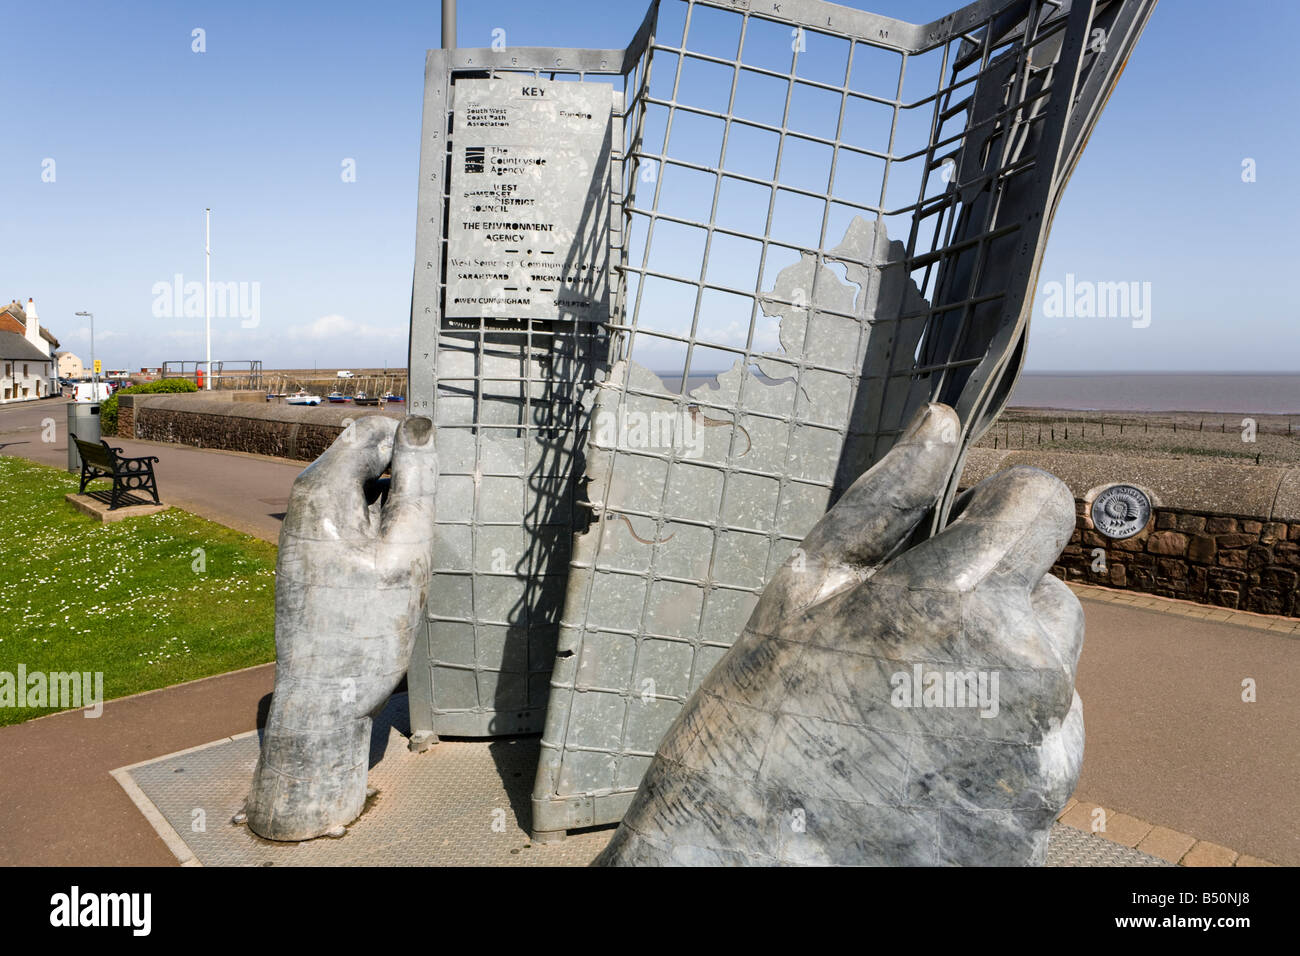 Sculpture marking one end of the South West Coast Path National Trail on the seafront at Minehead, Somerset UK. Stock Photo